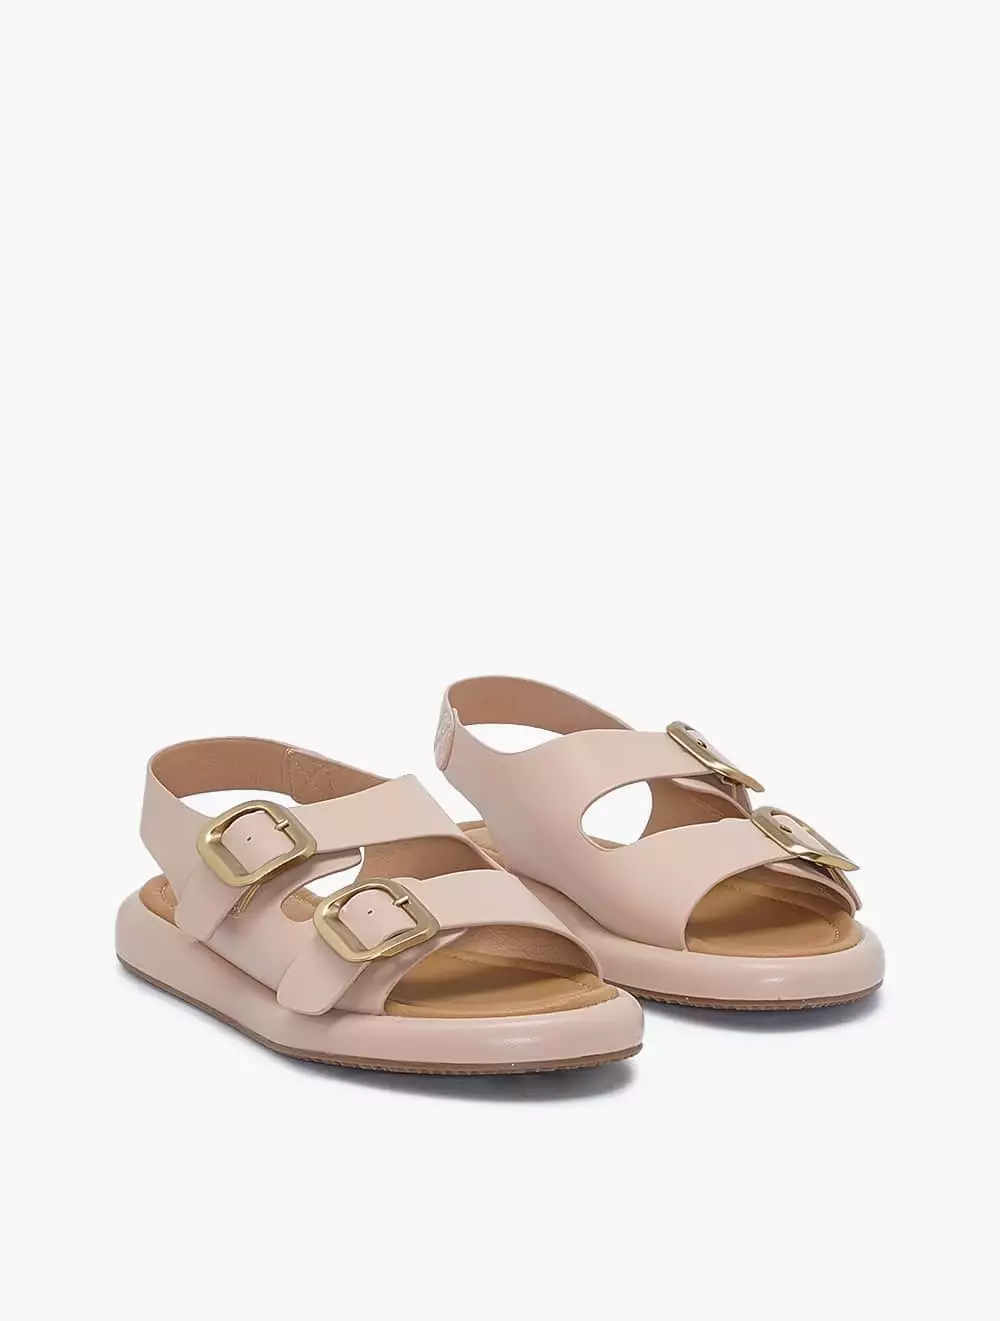 Jual PAYLESS Payless Chrissie Womens Maida Sandals - Nude_05 - Nude ...